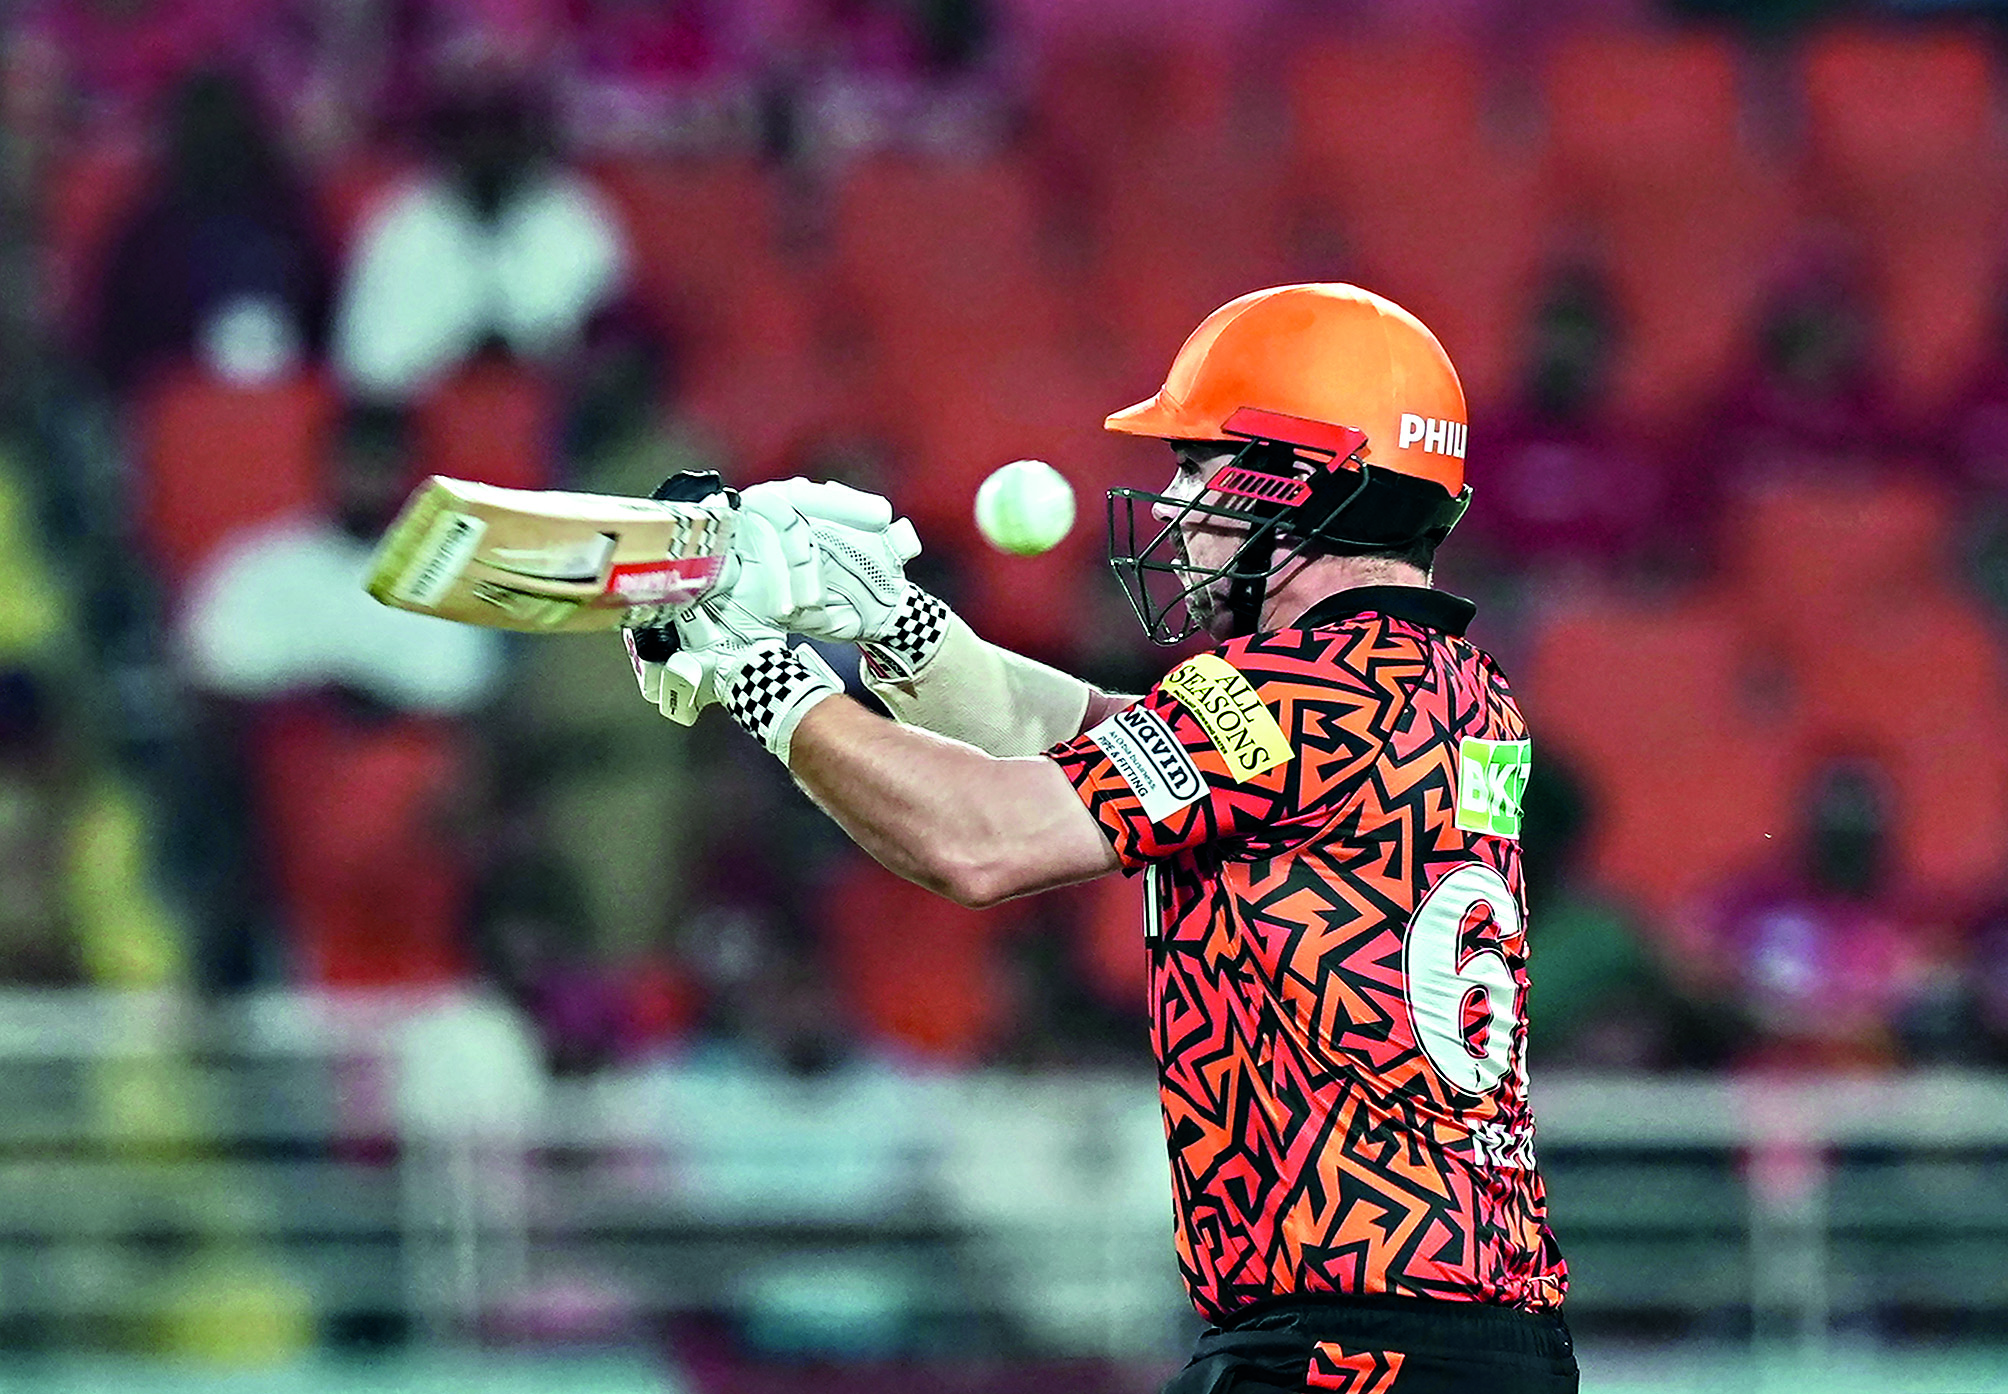 RCB-SRH game was one of sixes, not of batsmanship: Finch